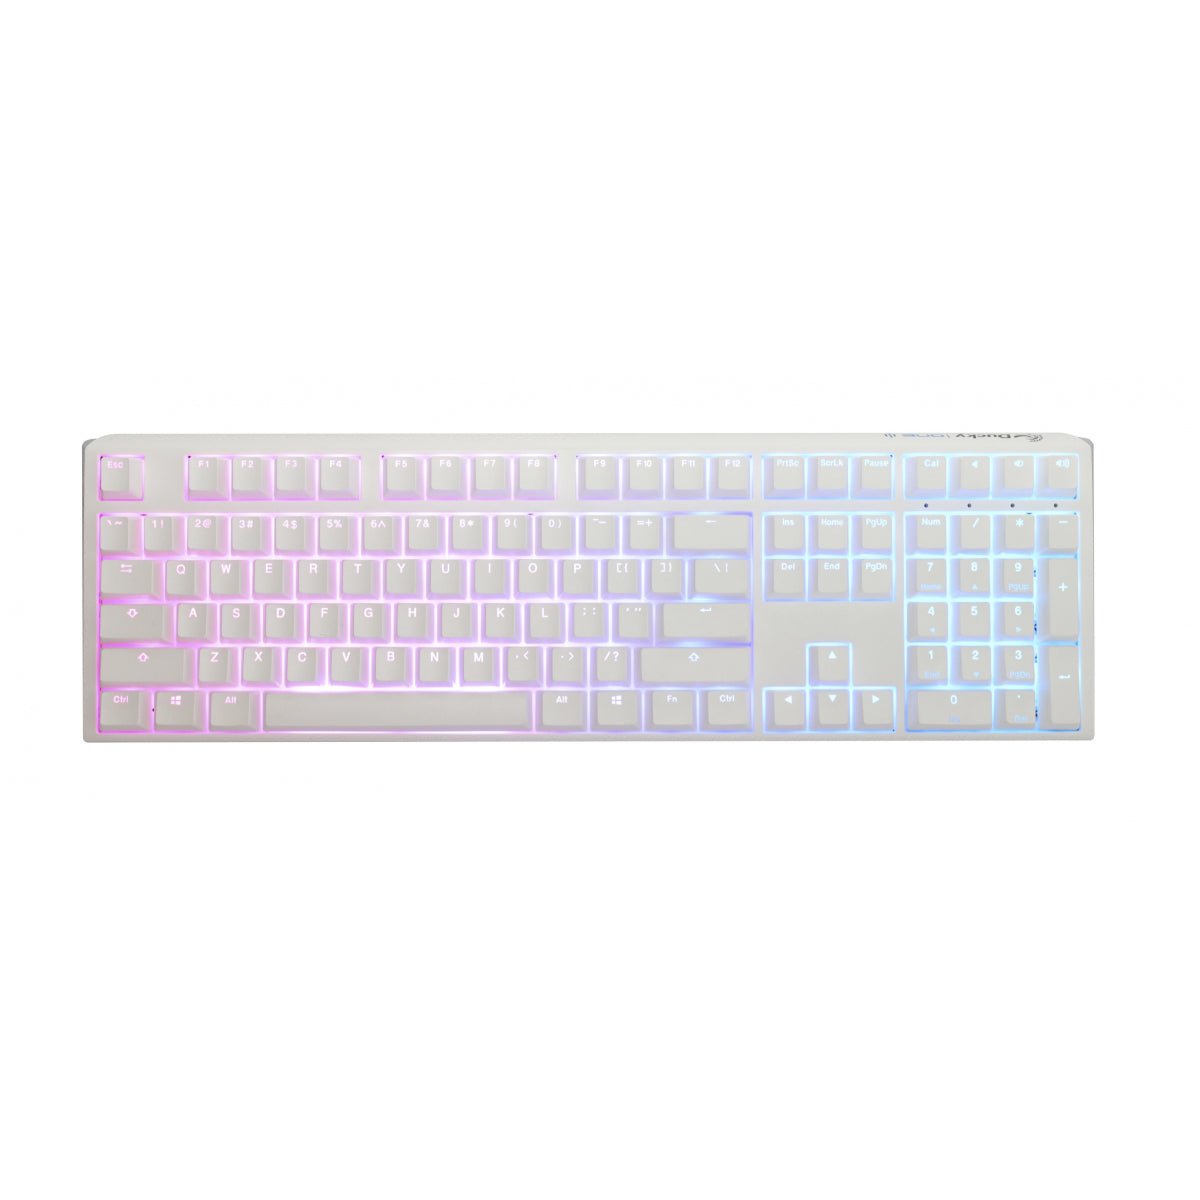 Ducky One 3 Full Size Pure White Wired Mechanical Gaming Keyboard - Blue Switch - لوحة مفاتيح - Store 974 | ستور ٩٧٤